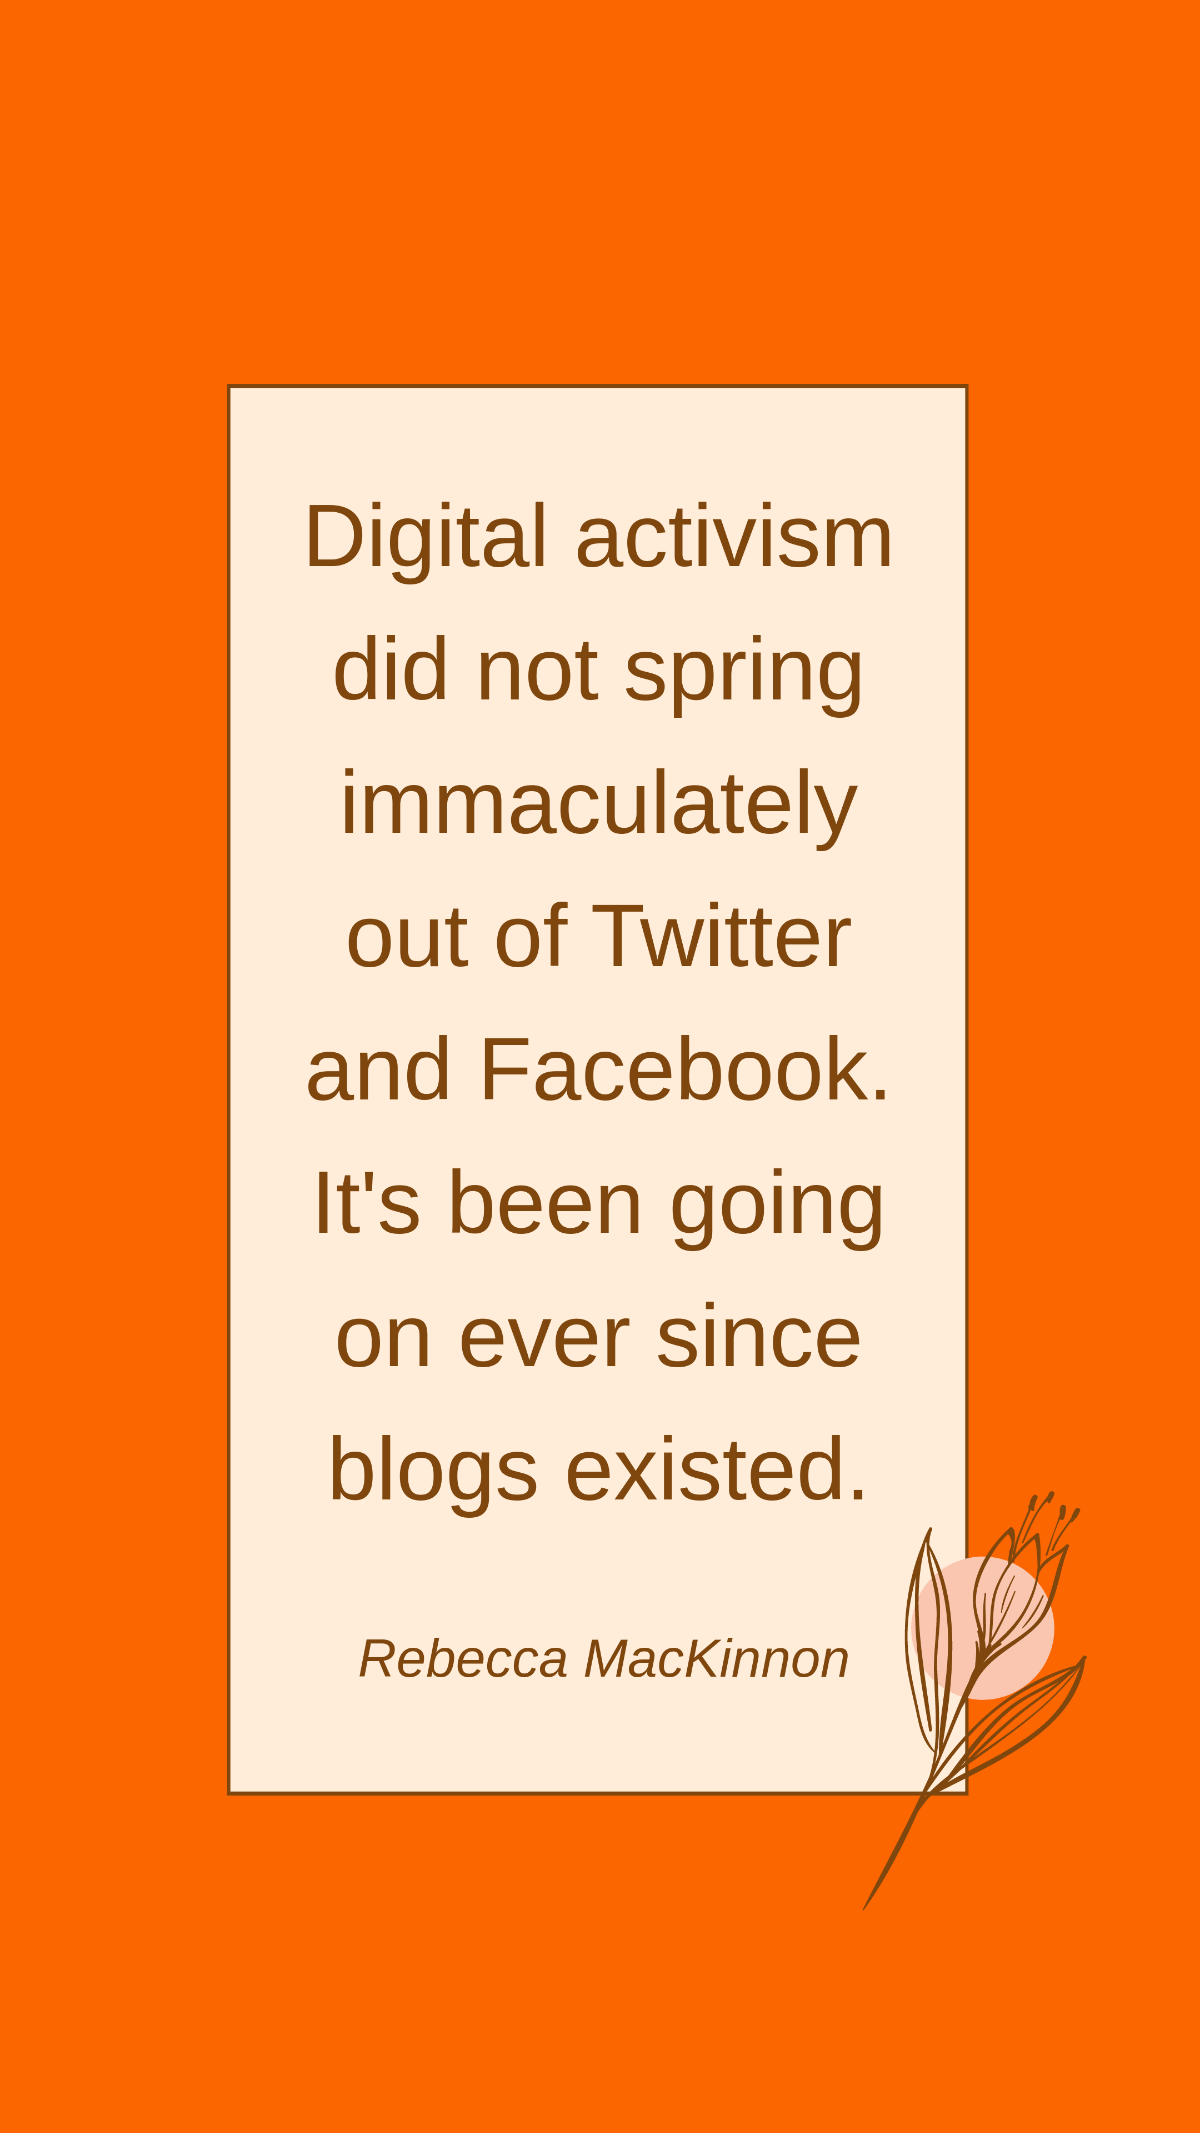 Rebecca MacKinnon - Digital activism did not spring immaculately out of Twitter and Facebook. It's been going on ever since blogs existed.